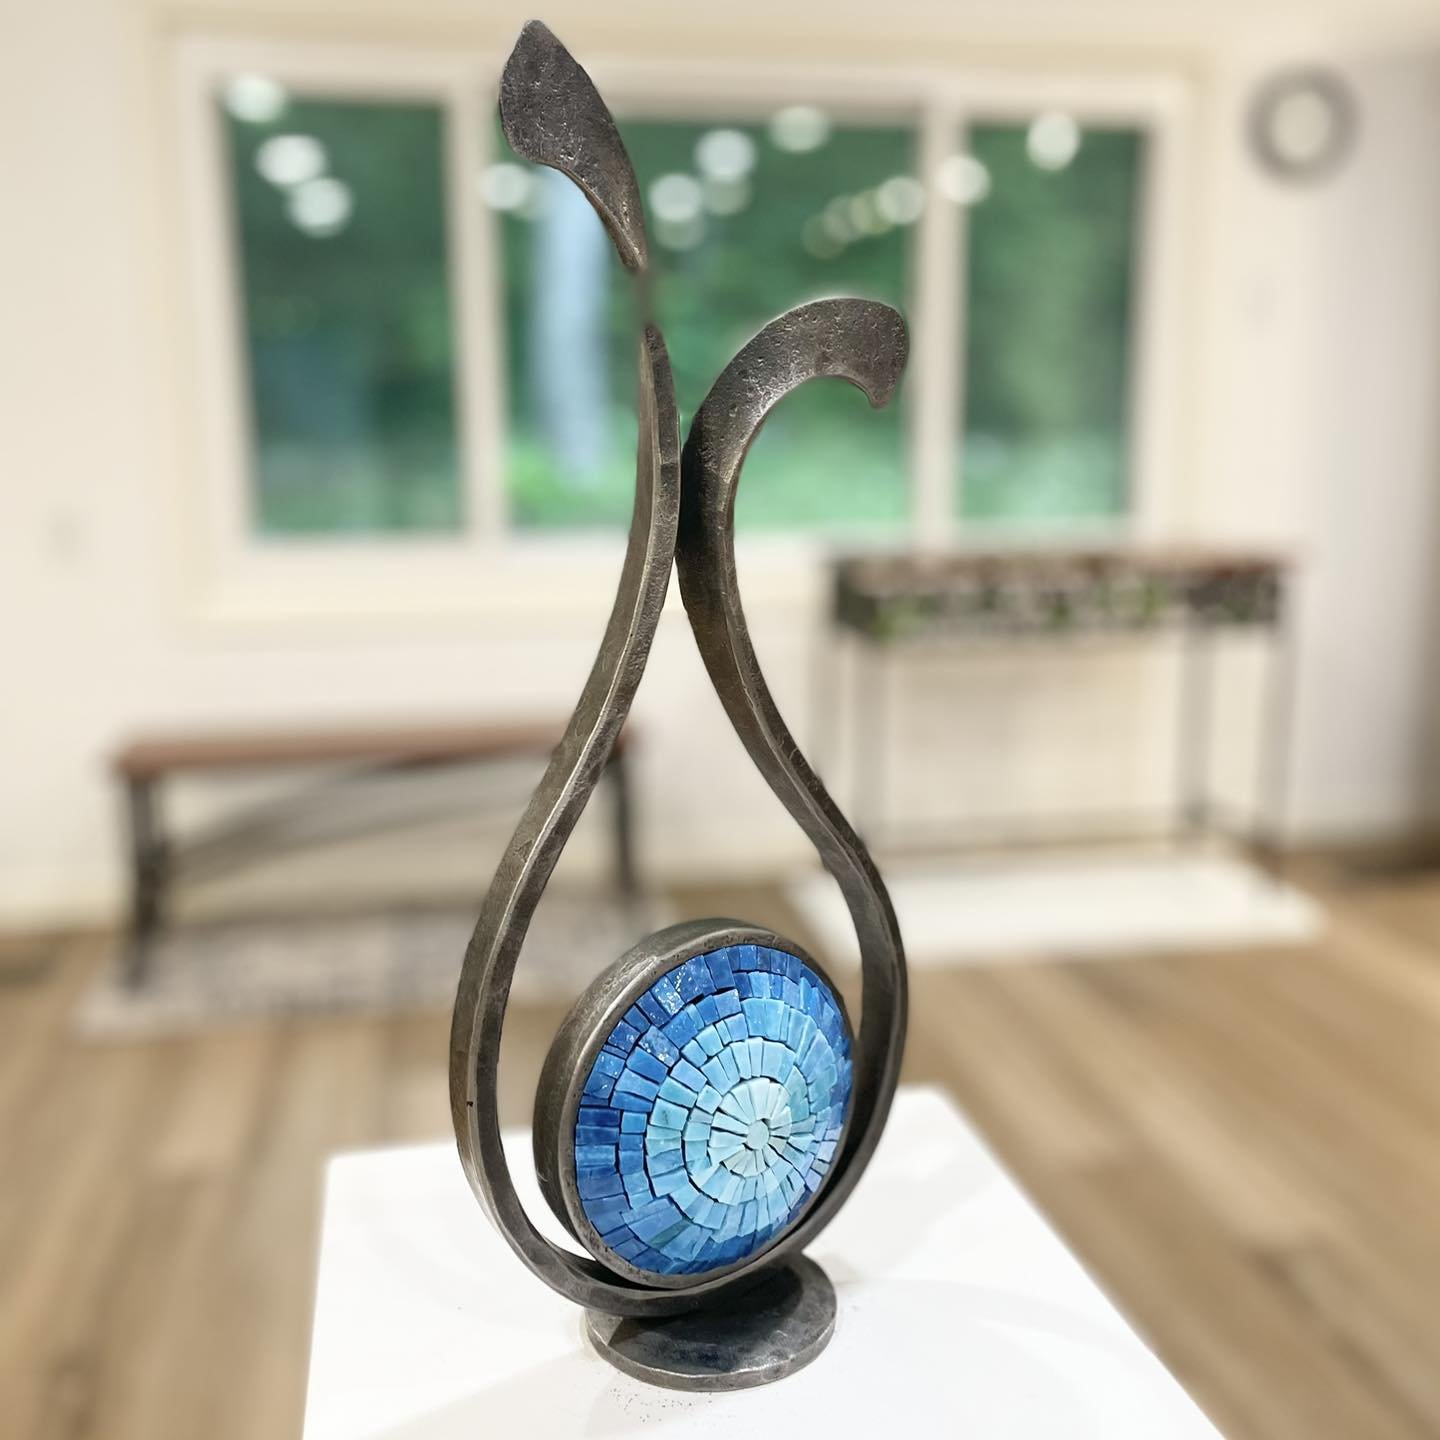 Excited to bring our latest collaborative forged steel + mosaic sculptures to Reston later this month for the Tephra ICA Arts Festival. ⚒️🎨

Find us in booth 111 right outside the @tephra_ica museum May 18 and 19. Full details for the show are in th